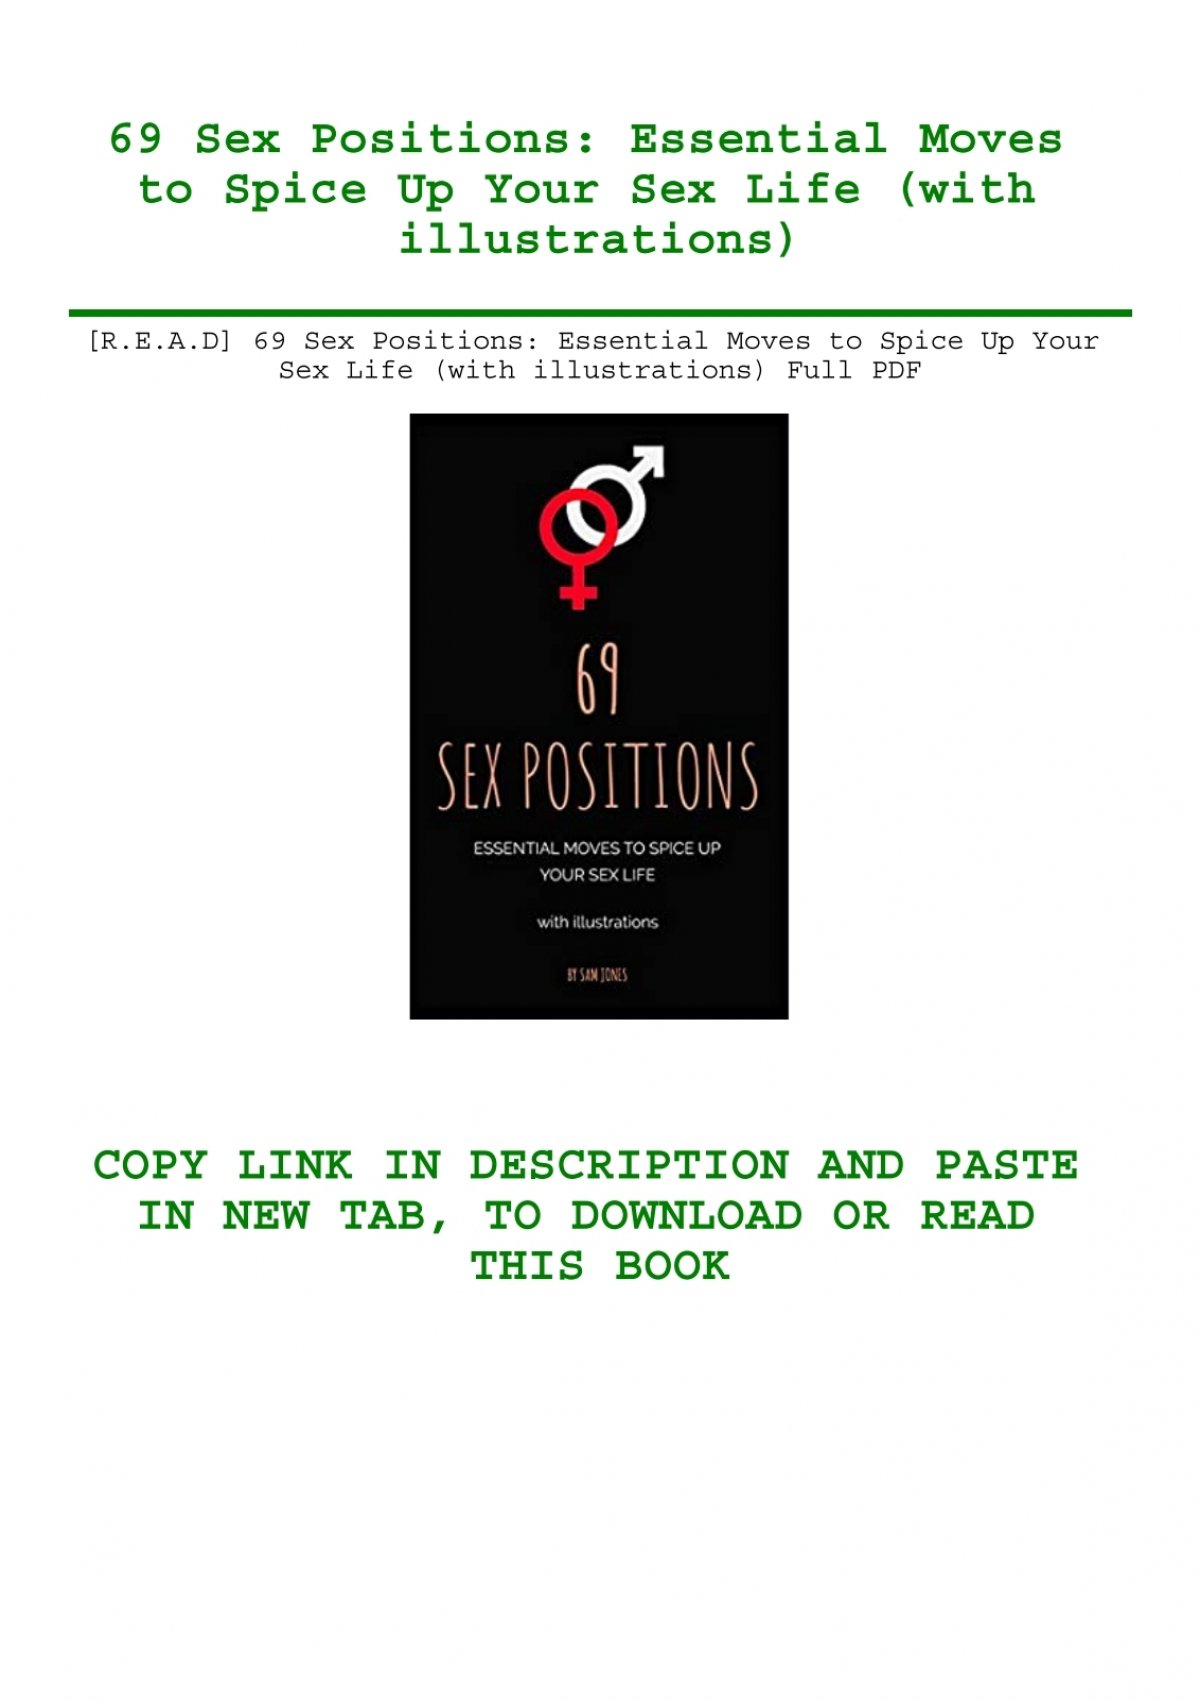 Read 69 Sex Positions Essential Moves To Spice Up Your Sex Life With Illustrations Full Pdf 5491